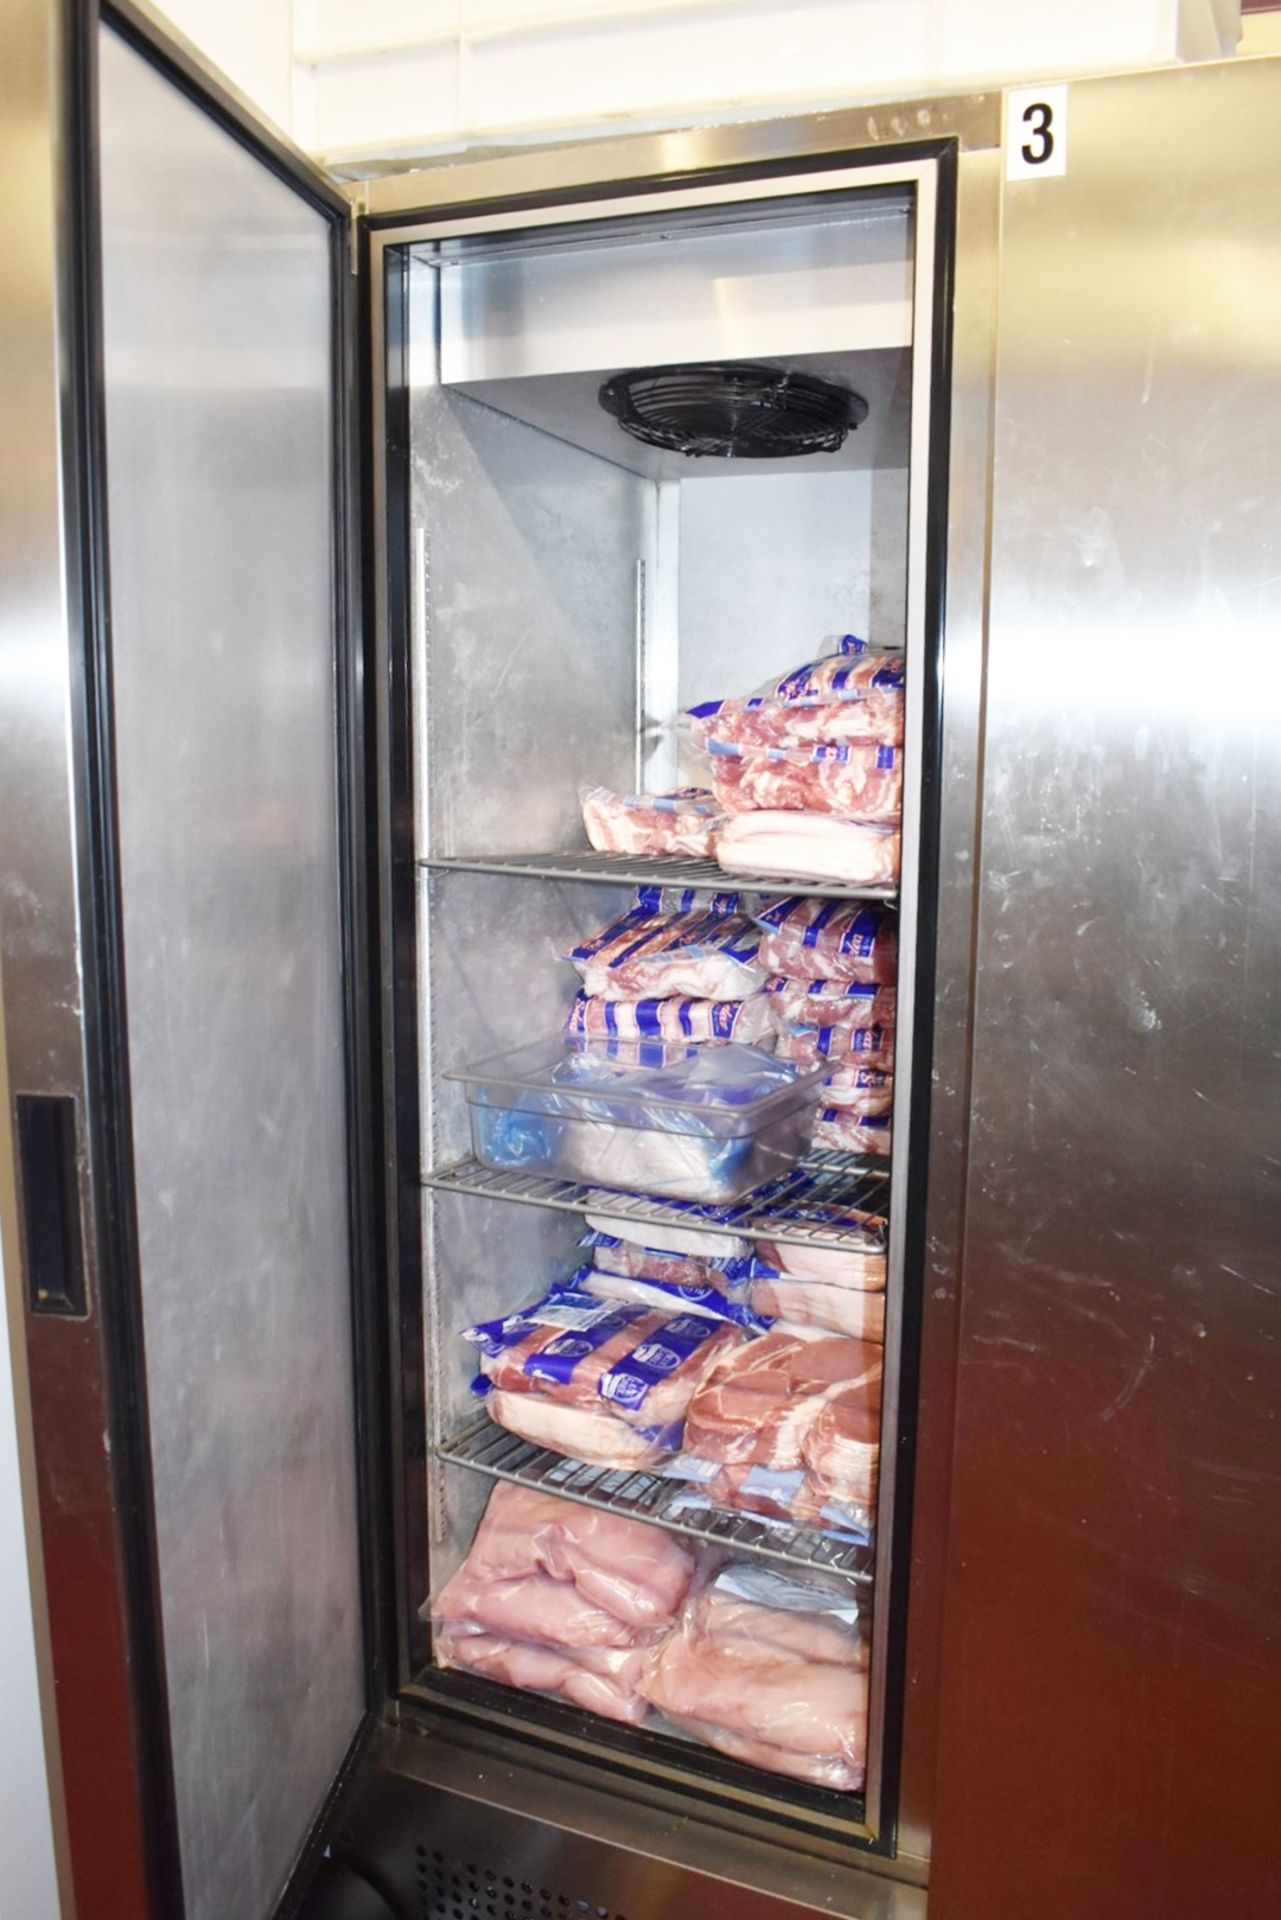 1 x Foster 800 Litre Double Door Meat Fridge With Stainless Steel Finish - Model FSL800M - H188 x - Image 2 of 8